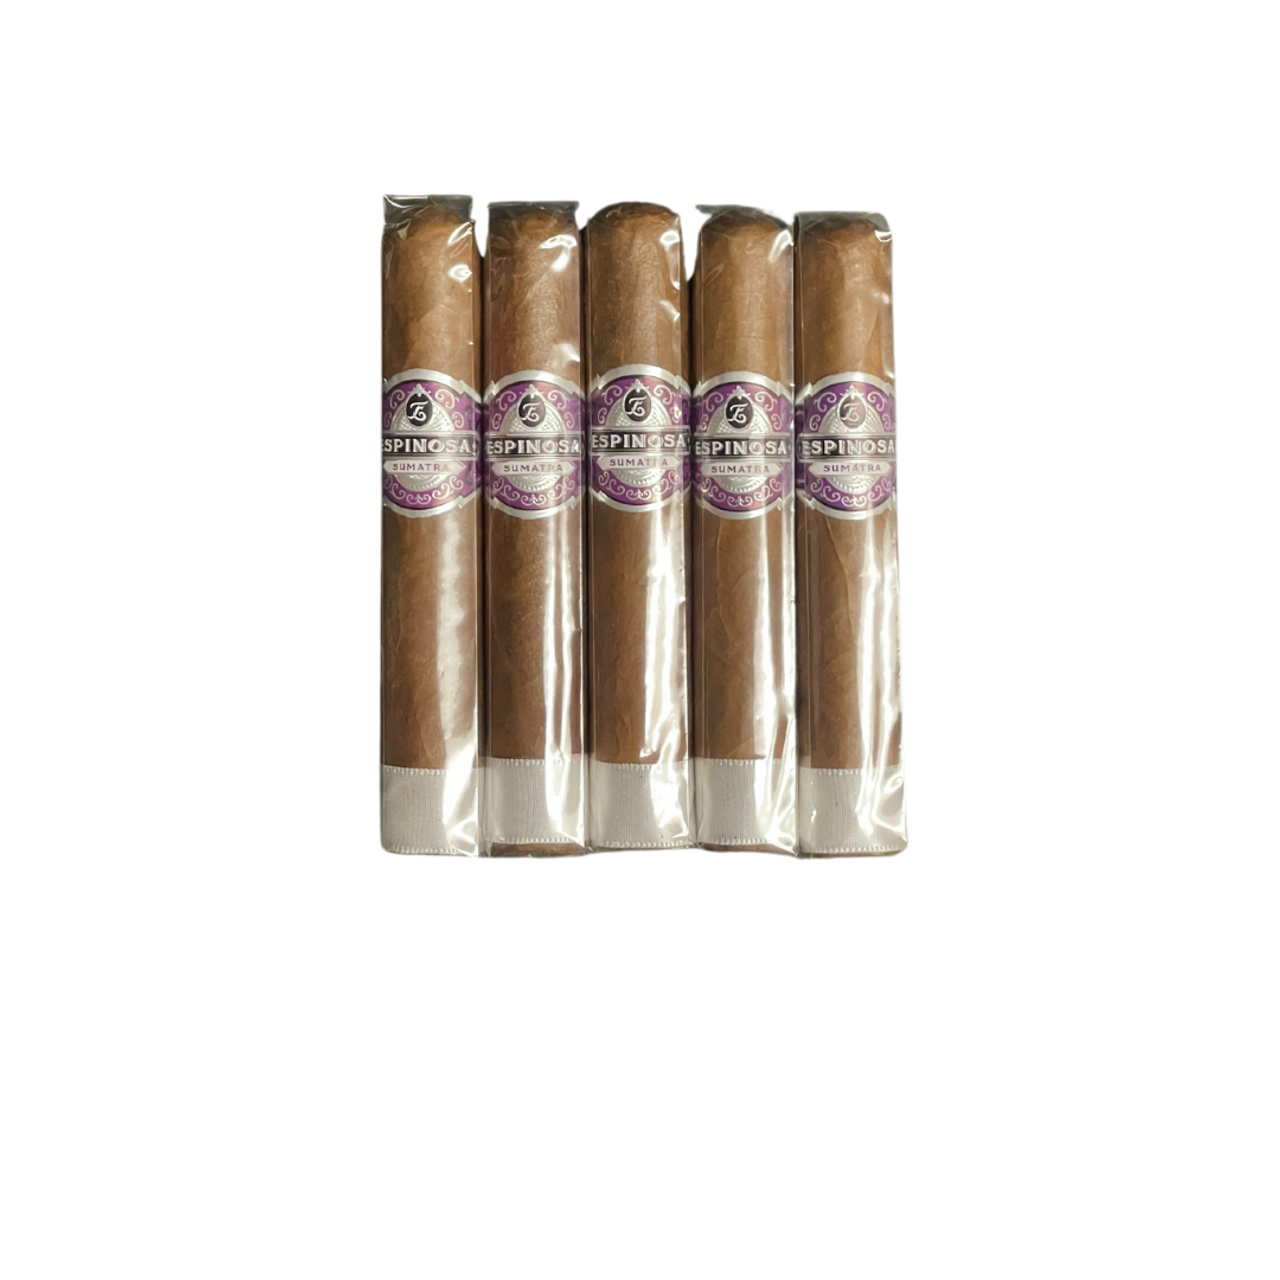 5 of the NEW Espinosa Sumatra Robusto's from cigarsamplers.com comes with FREE shipping!